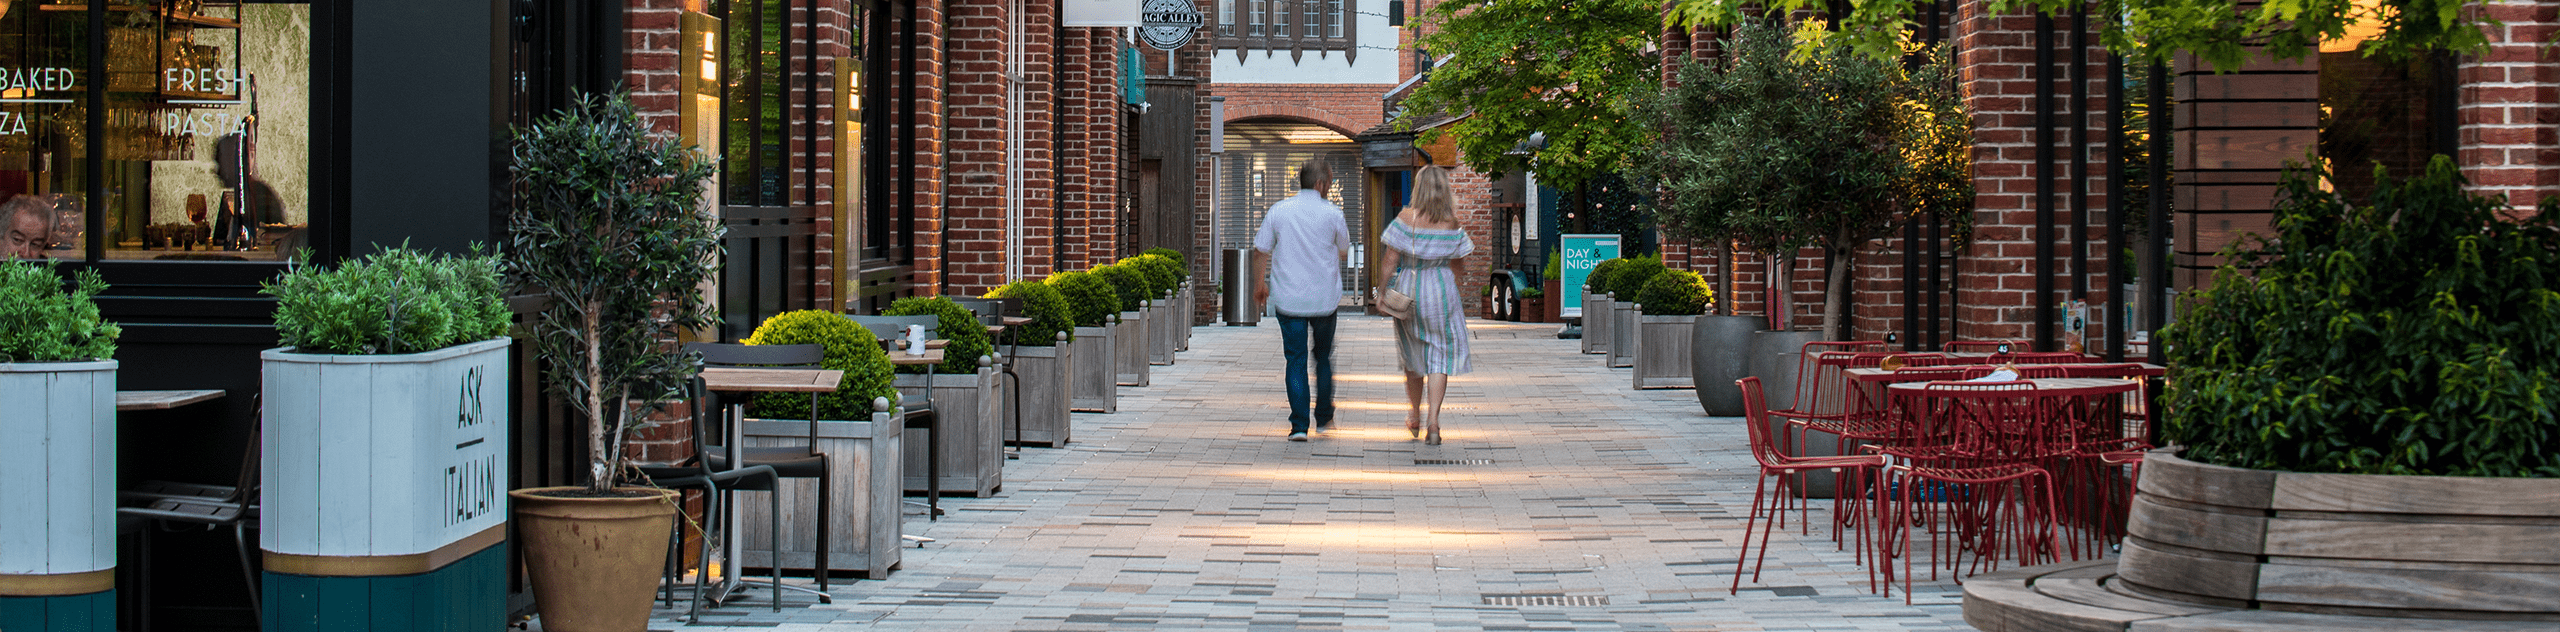 Photograph of couple walking through bell court, featuring resturant spill-out seating and trees in planters. © BMD